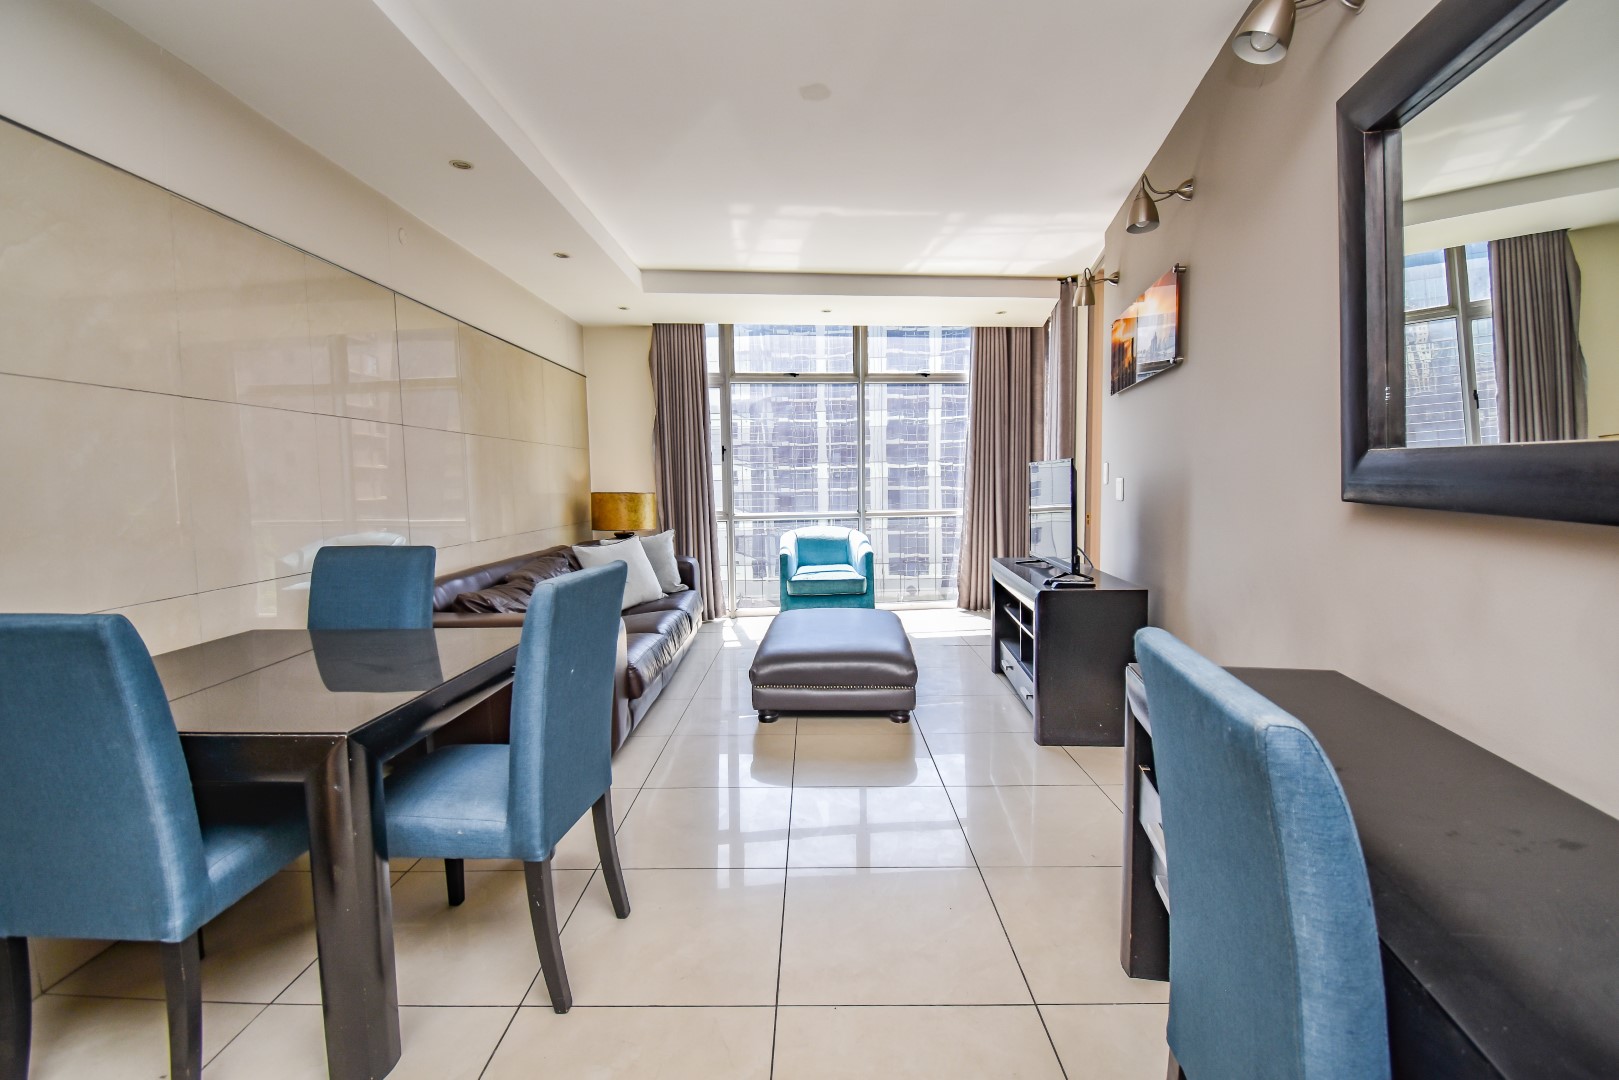 Beautifull Fully Furnished 2 Bedroom Apartment For Sale in , Sandown, Sandton